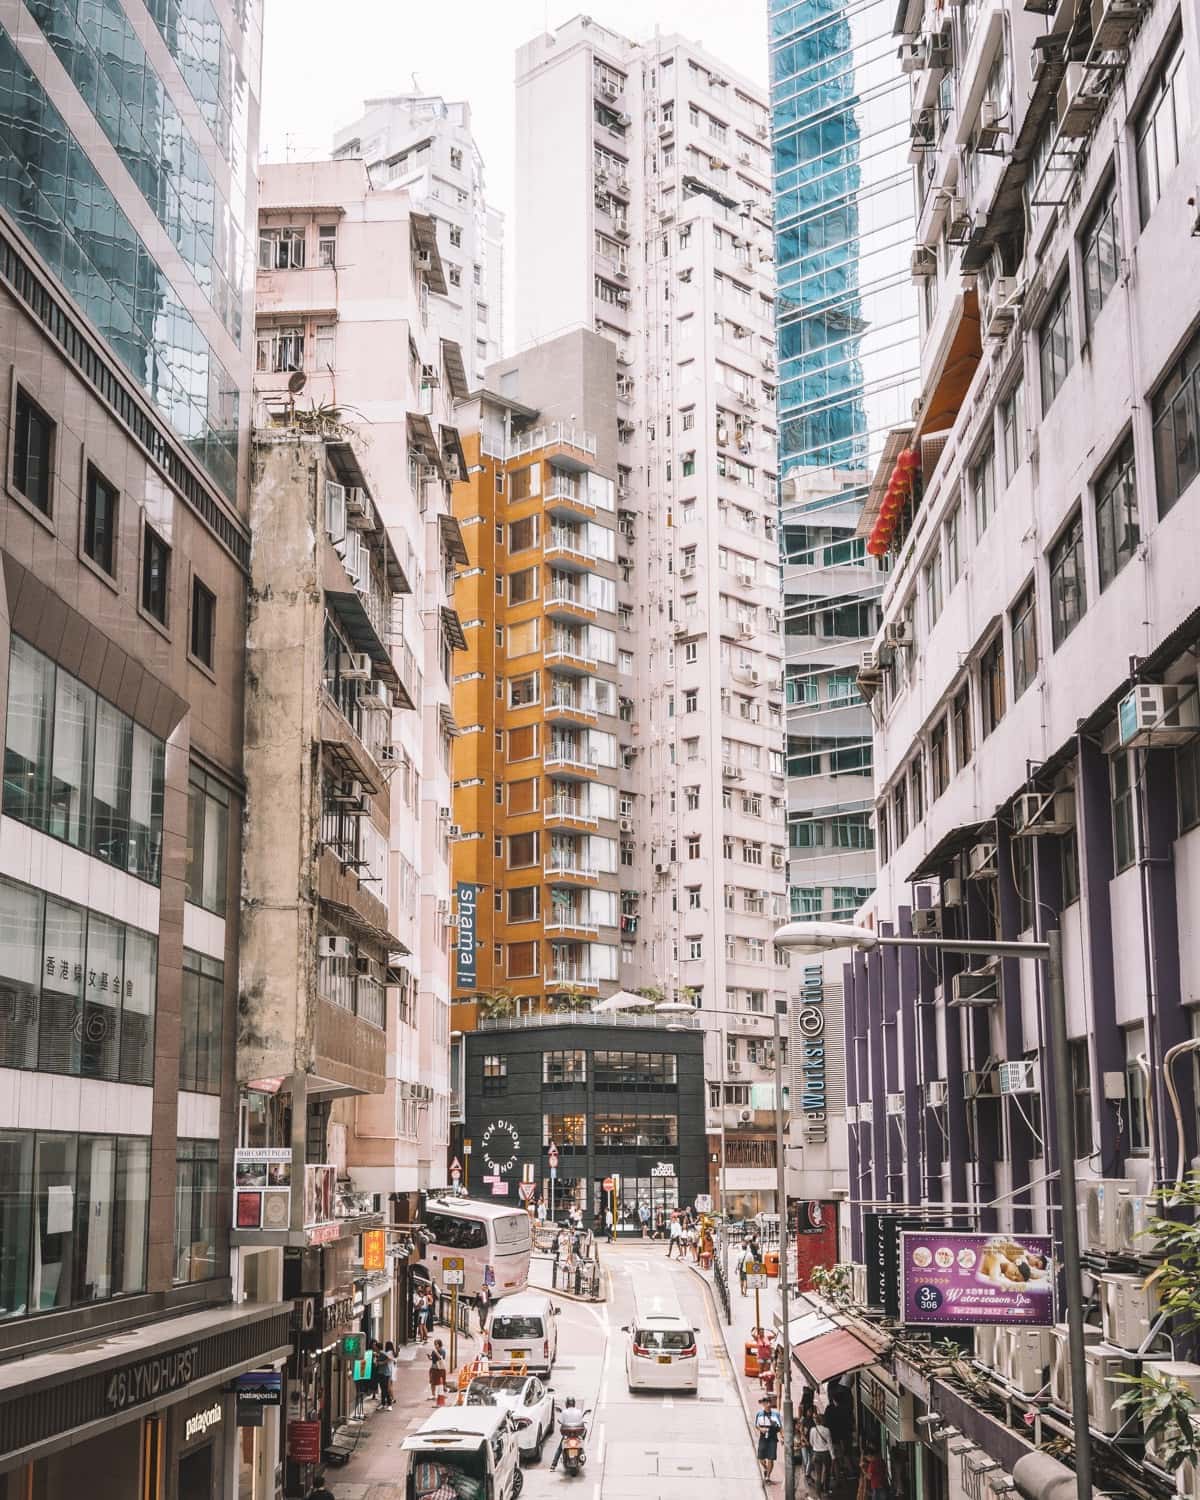 10 things every visitor must experience in Hong Kong